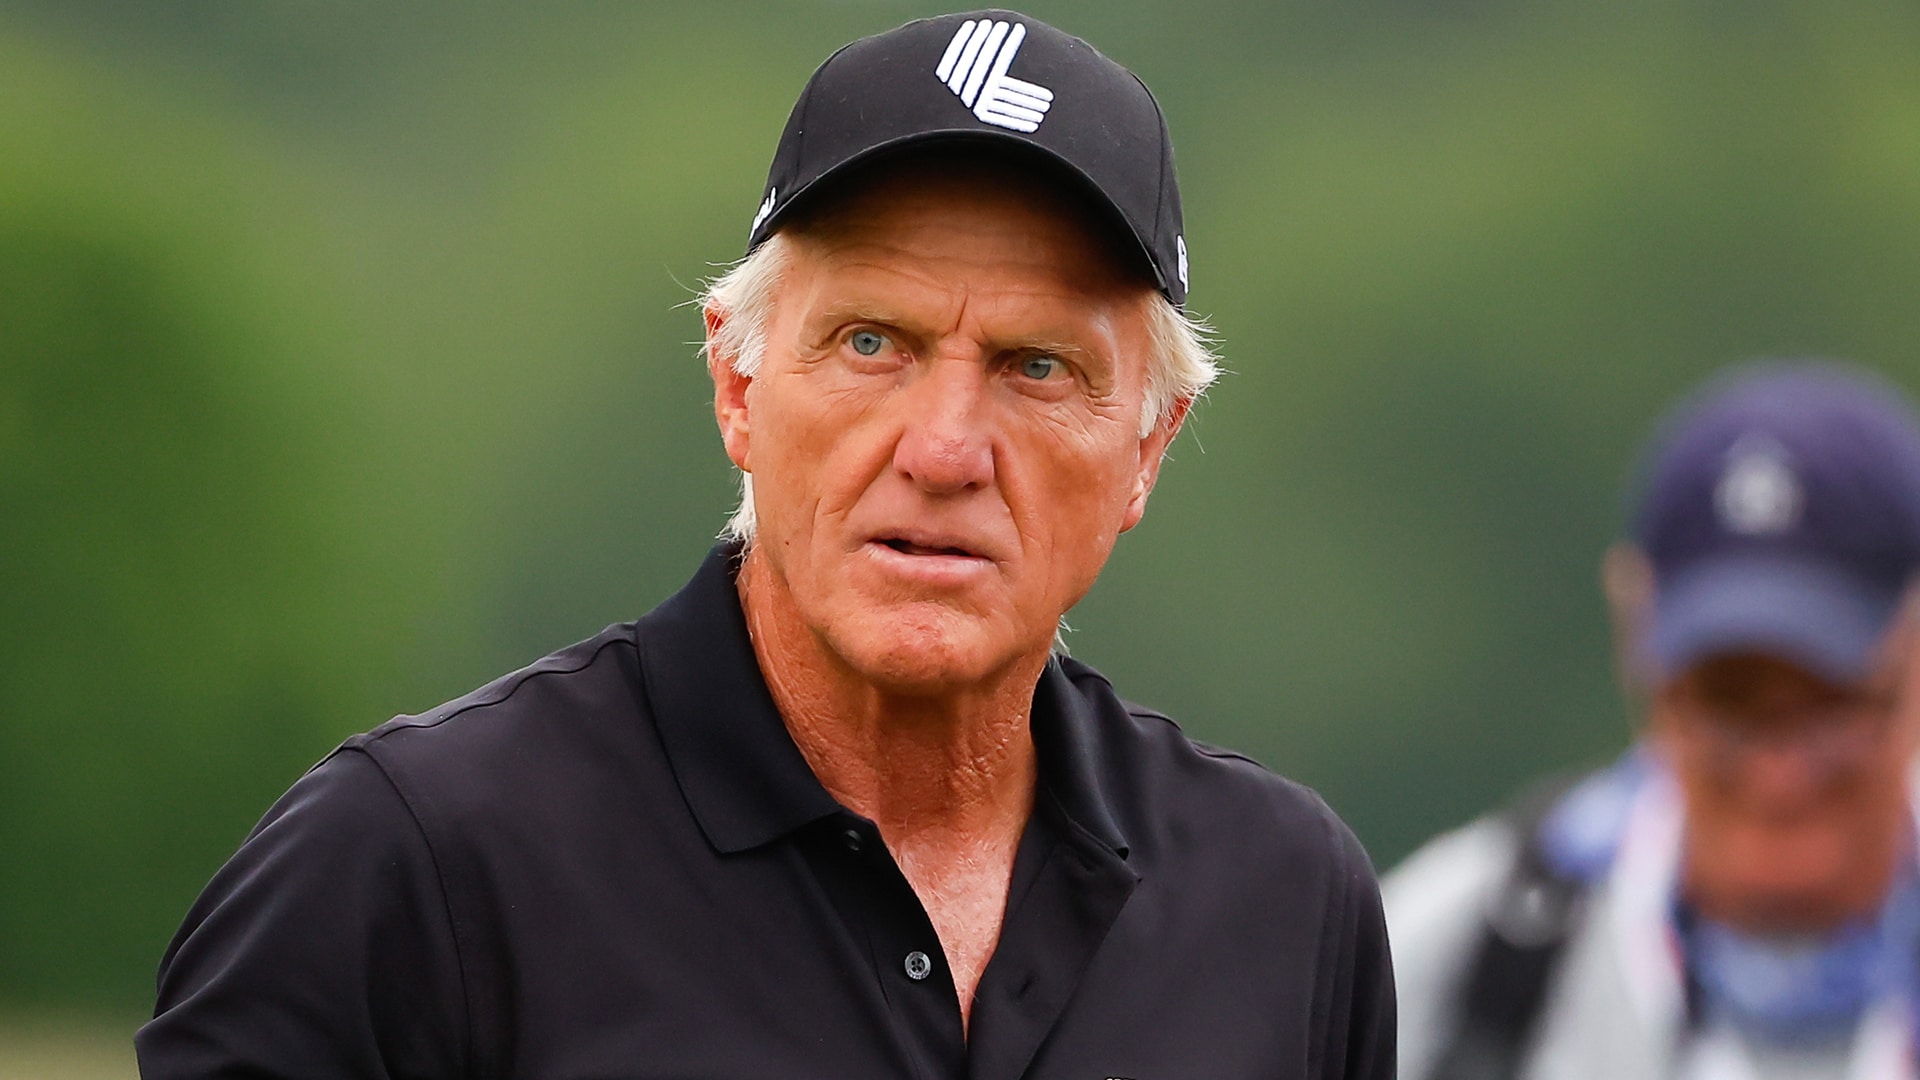 Greg Norman on Calls to Step Down: Tiger Woods, Rory McIlroy Have No Idea What They’re Talking About